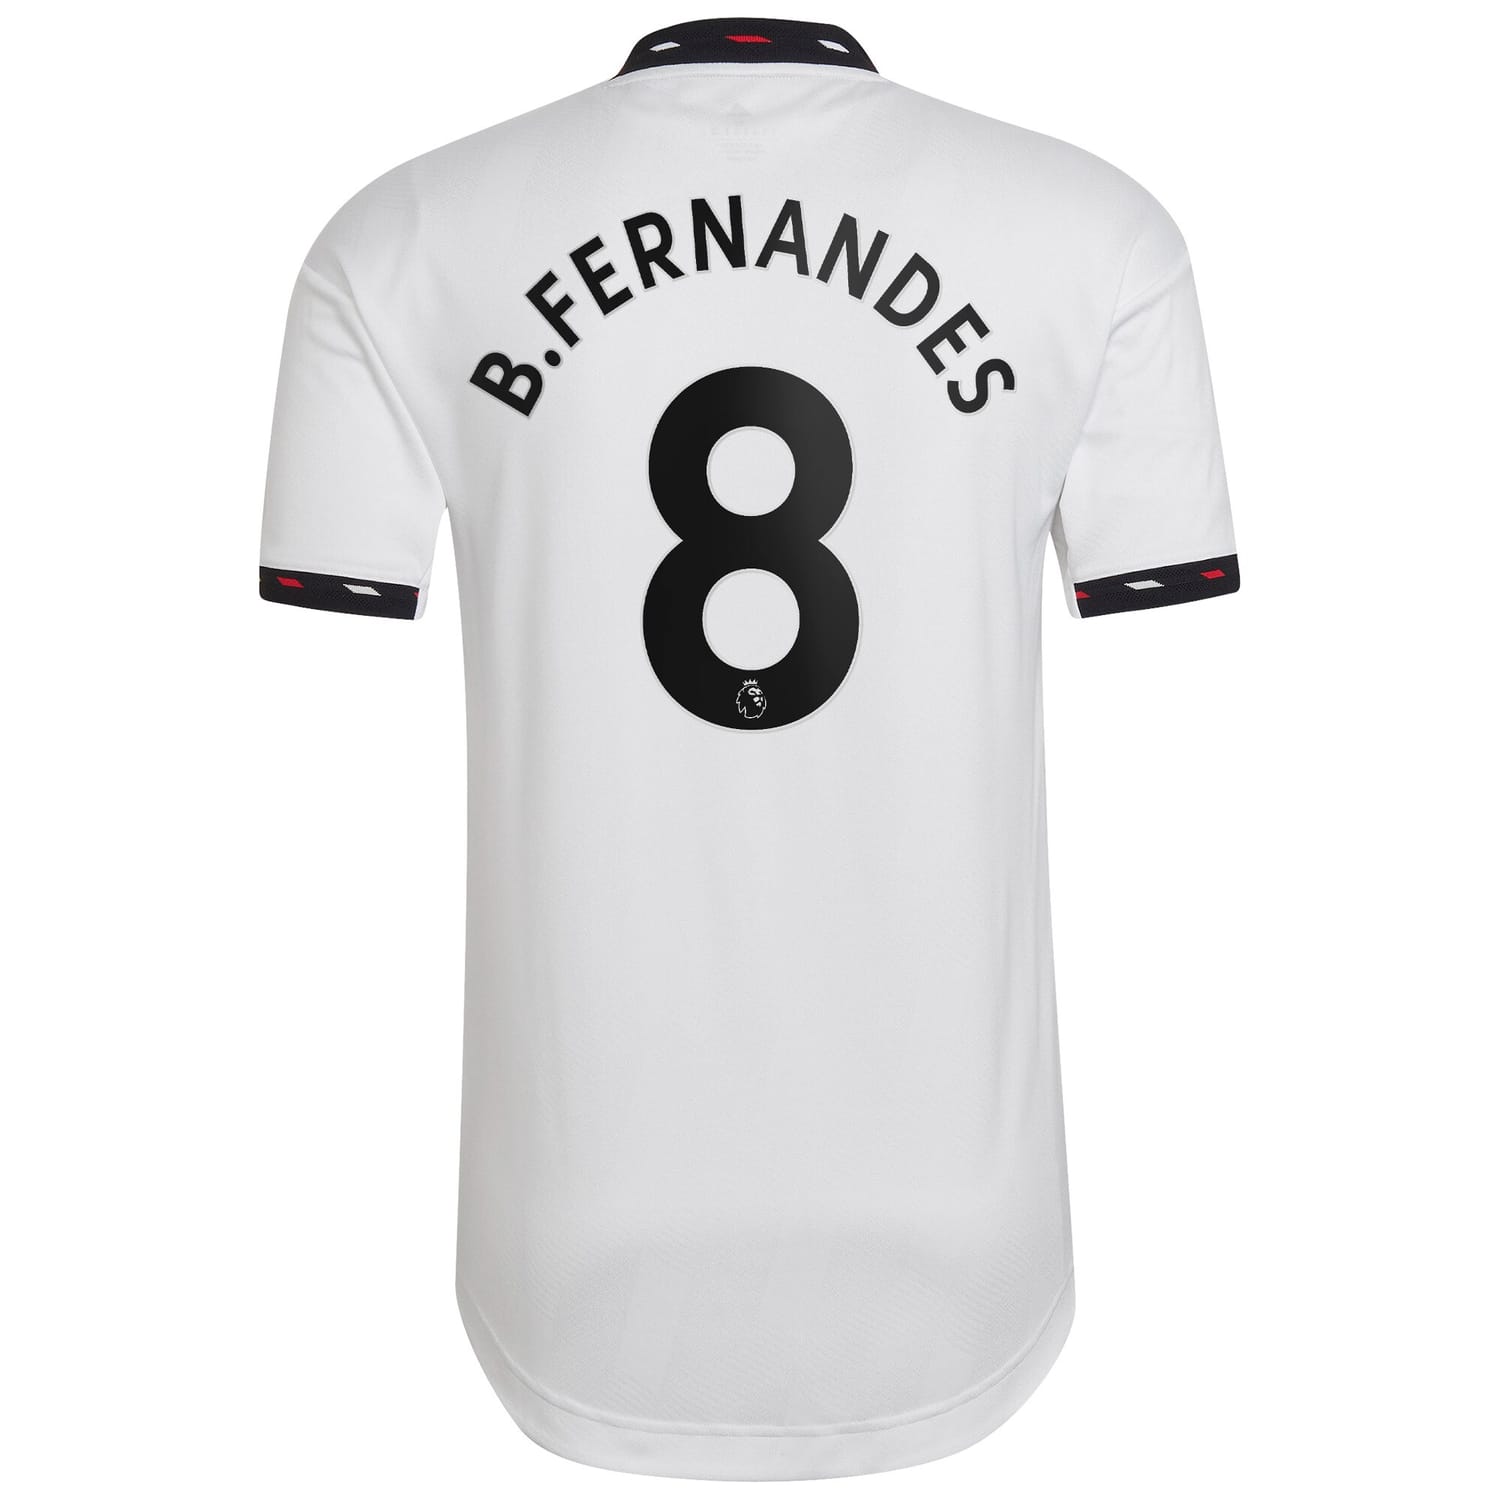 Premier League Manchester United Away Authentic Jersey Shirt 2022-23 player Bruno Fernandes 8 printing for Men